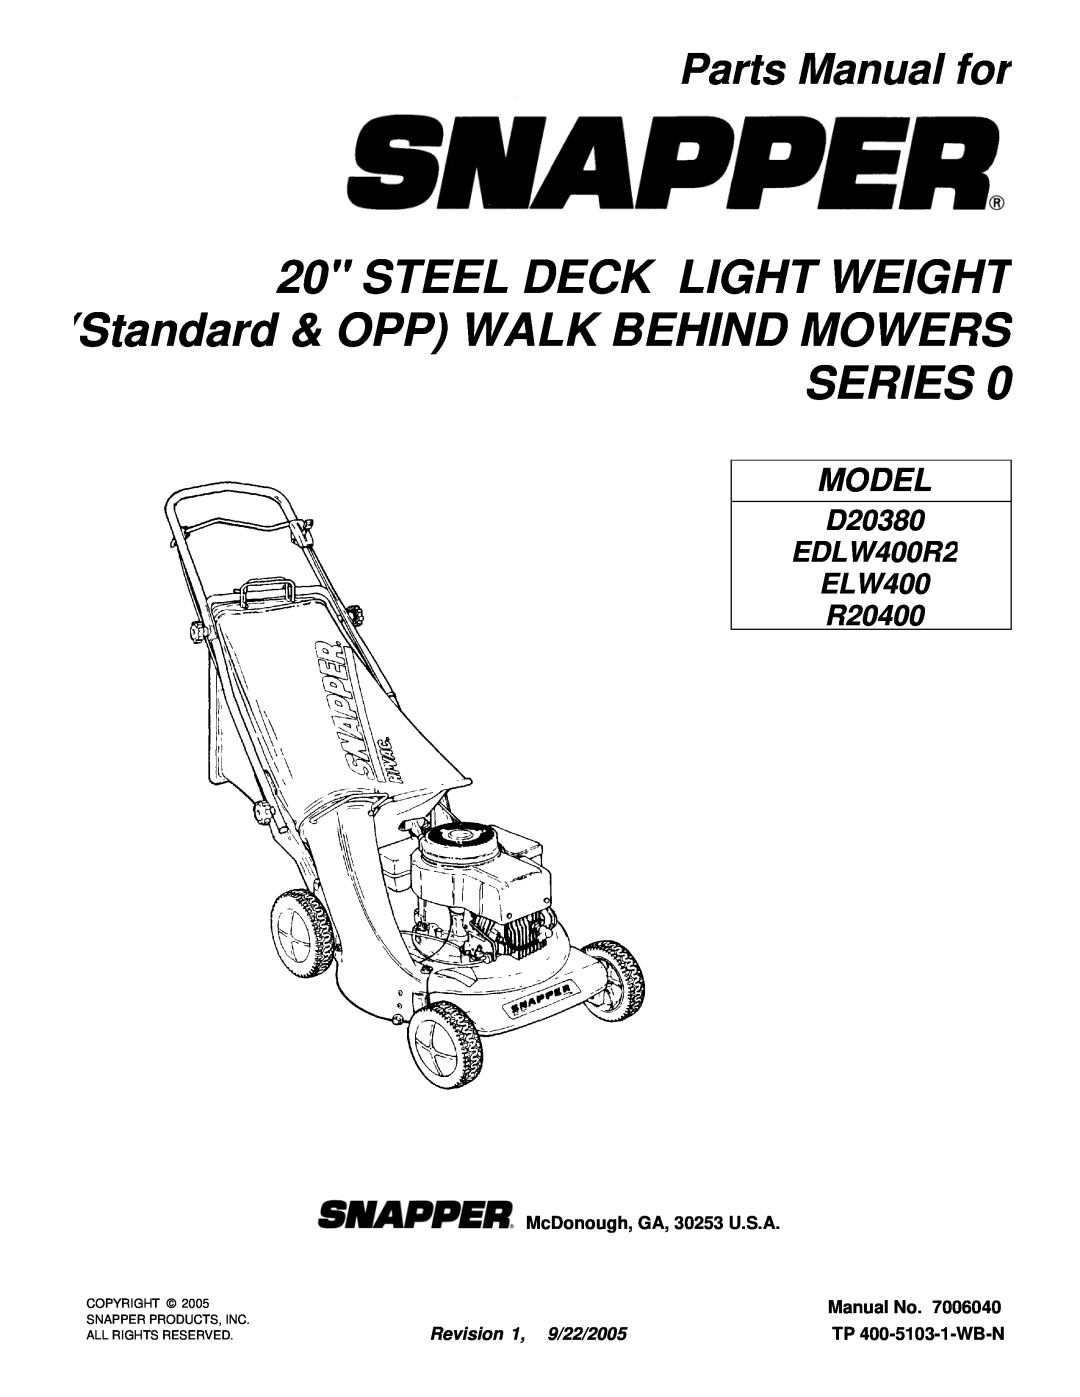 Snapper EDLW400R2 manual STEEL DECK LIGHT WEIGHT Standard & OPP WALK BEHIND MOWERS SERIES, Parts Manual for, Manual No 